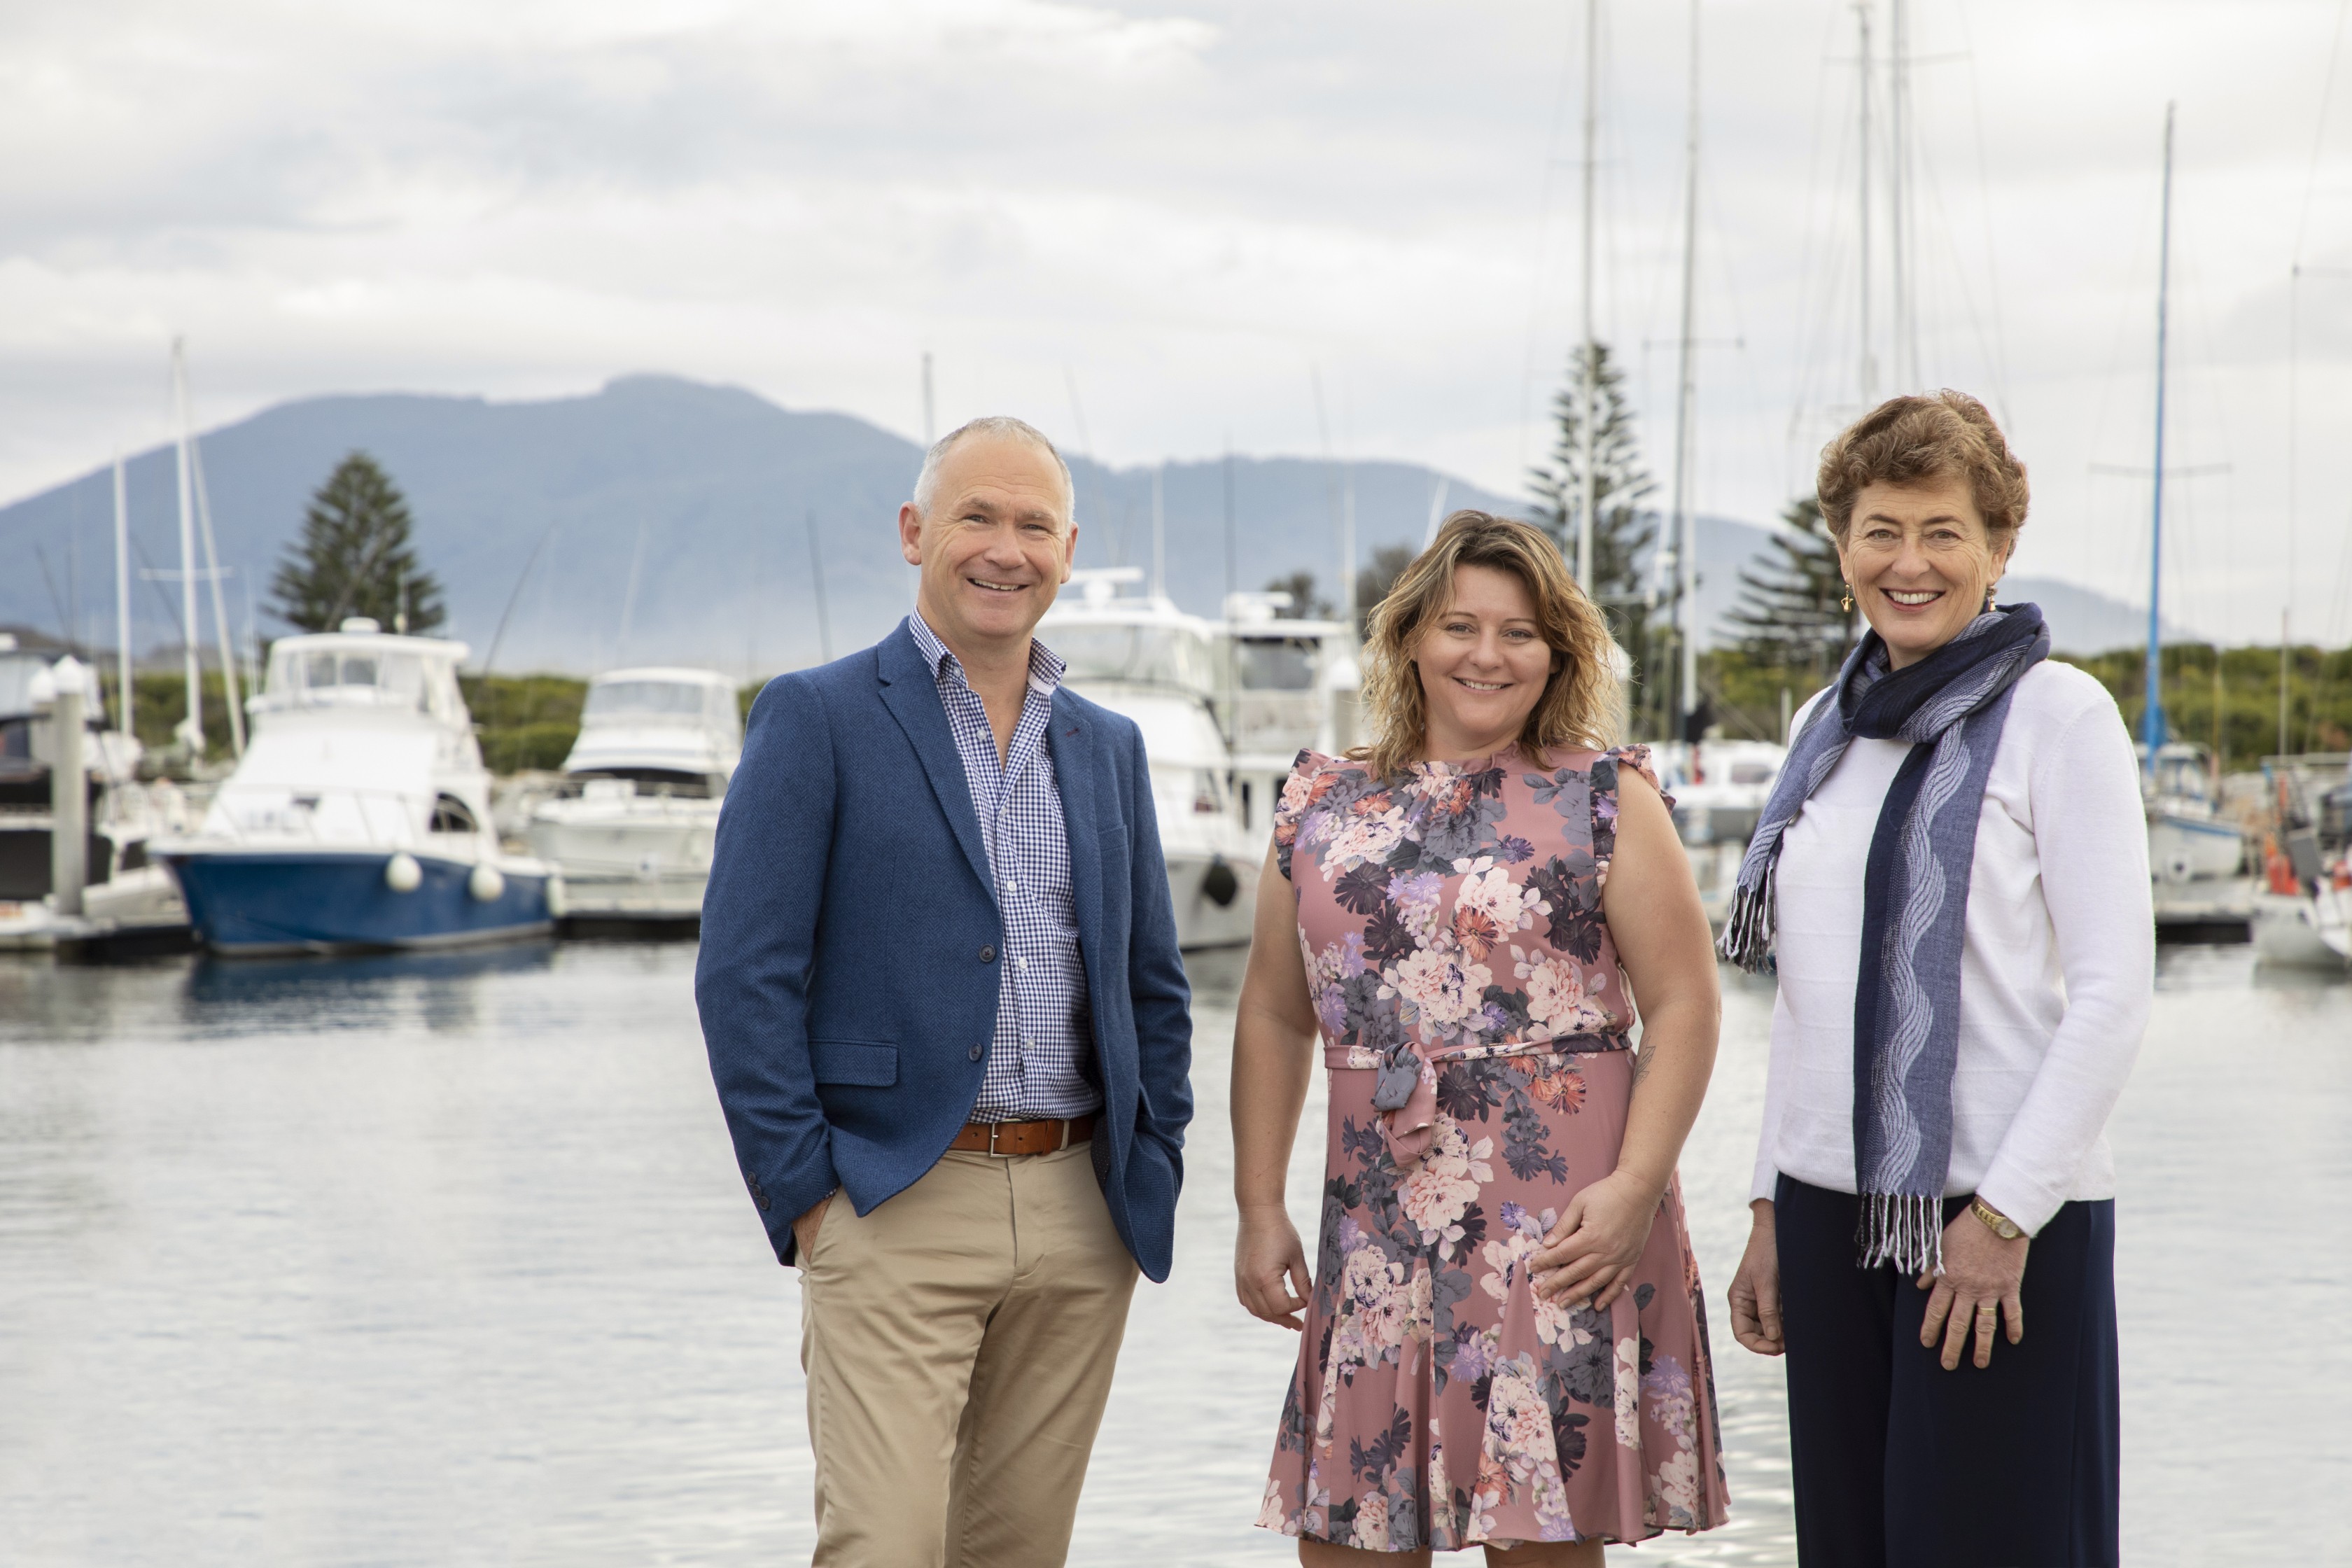 Initiative uniting quality food and wine on Far South Coast given $315k boost